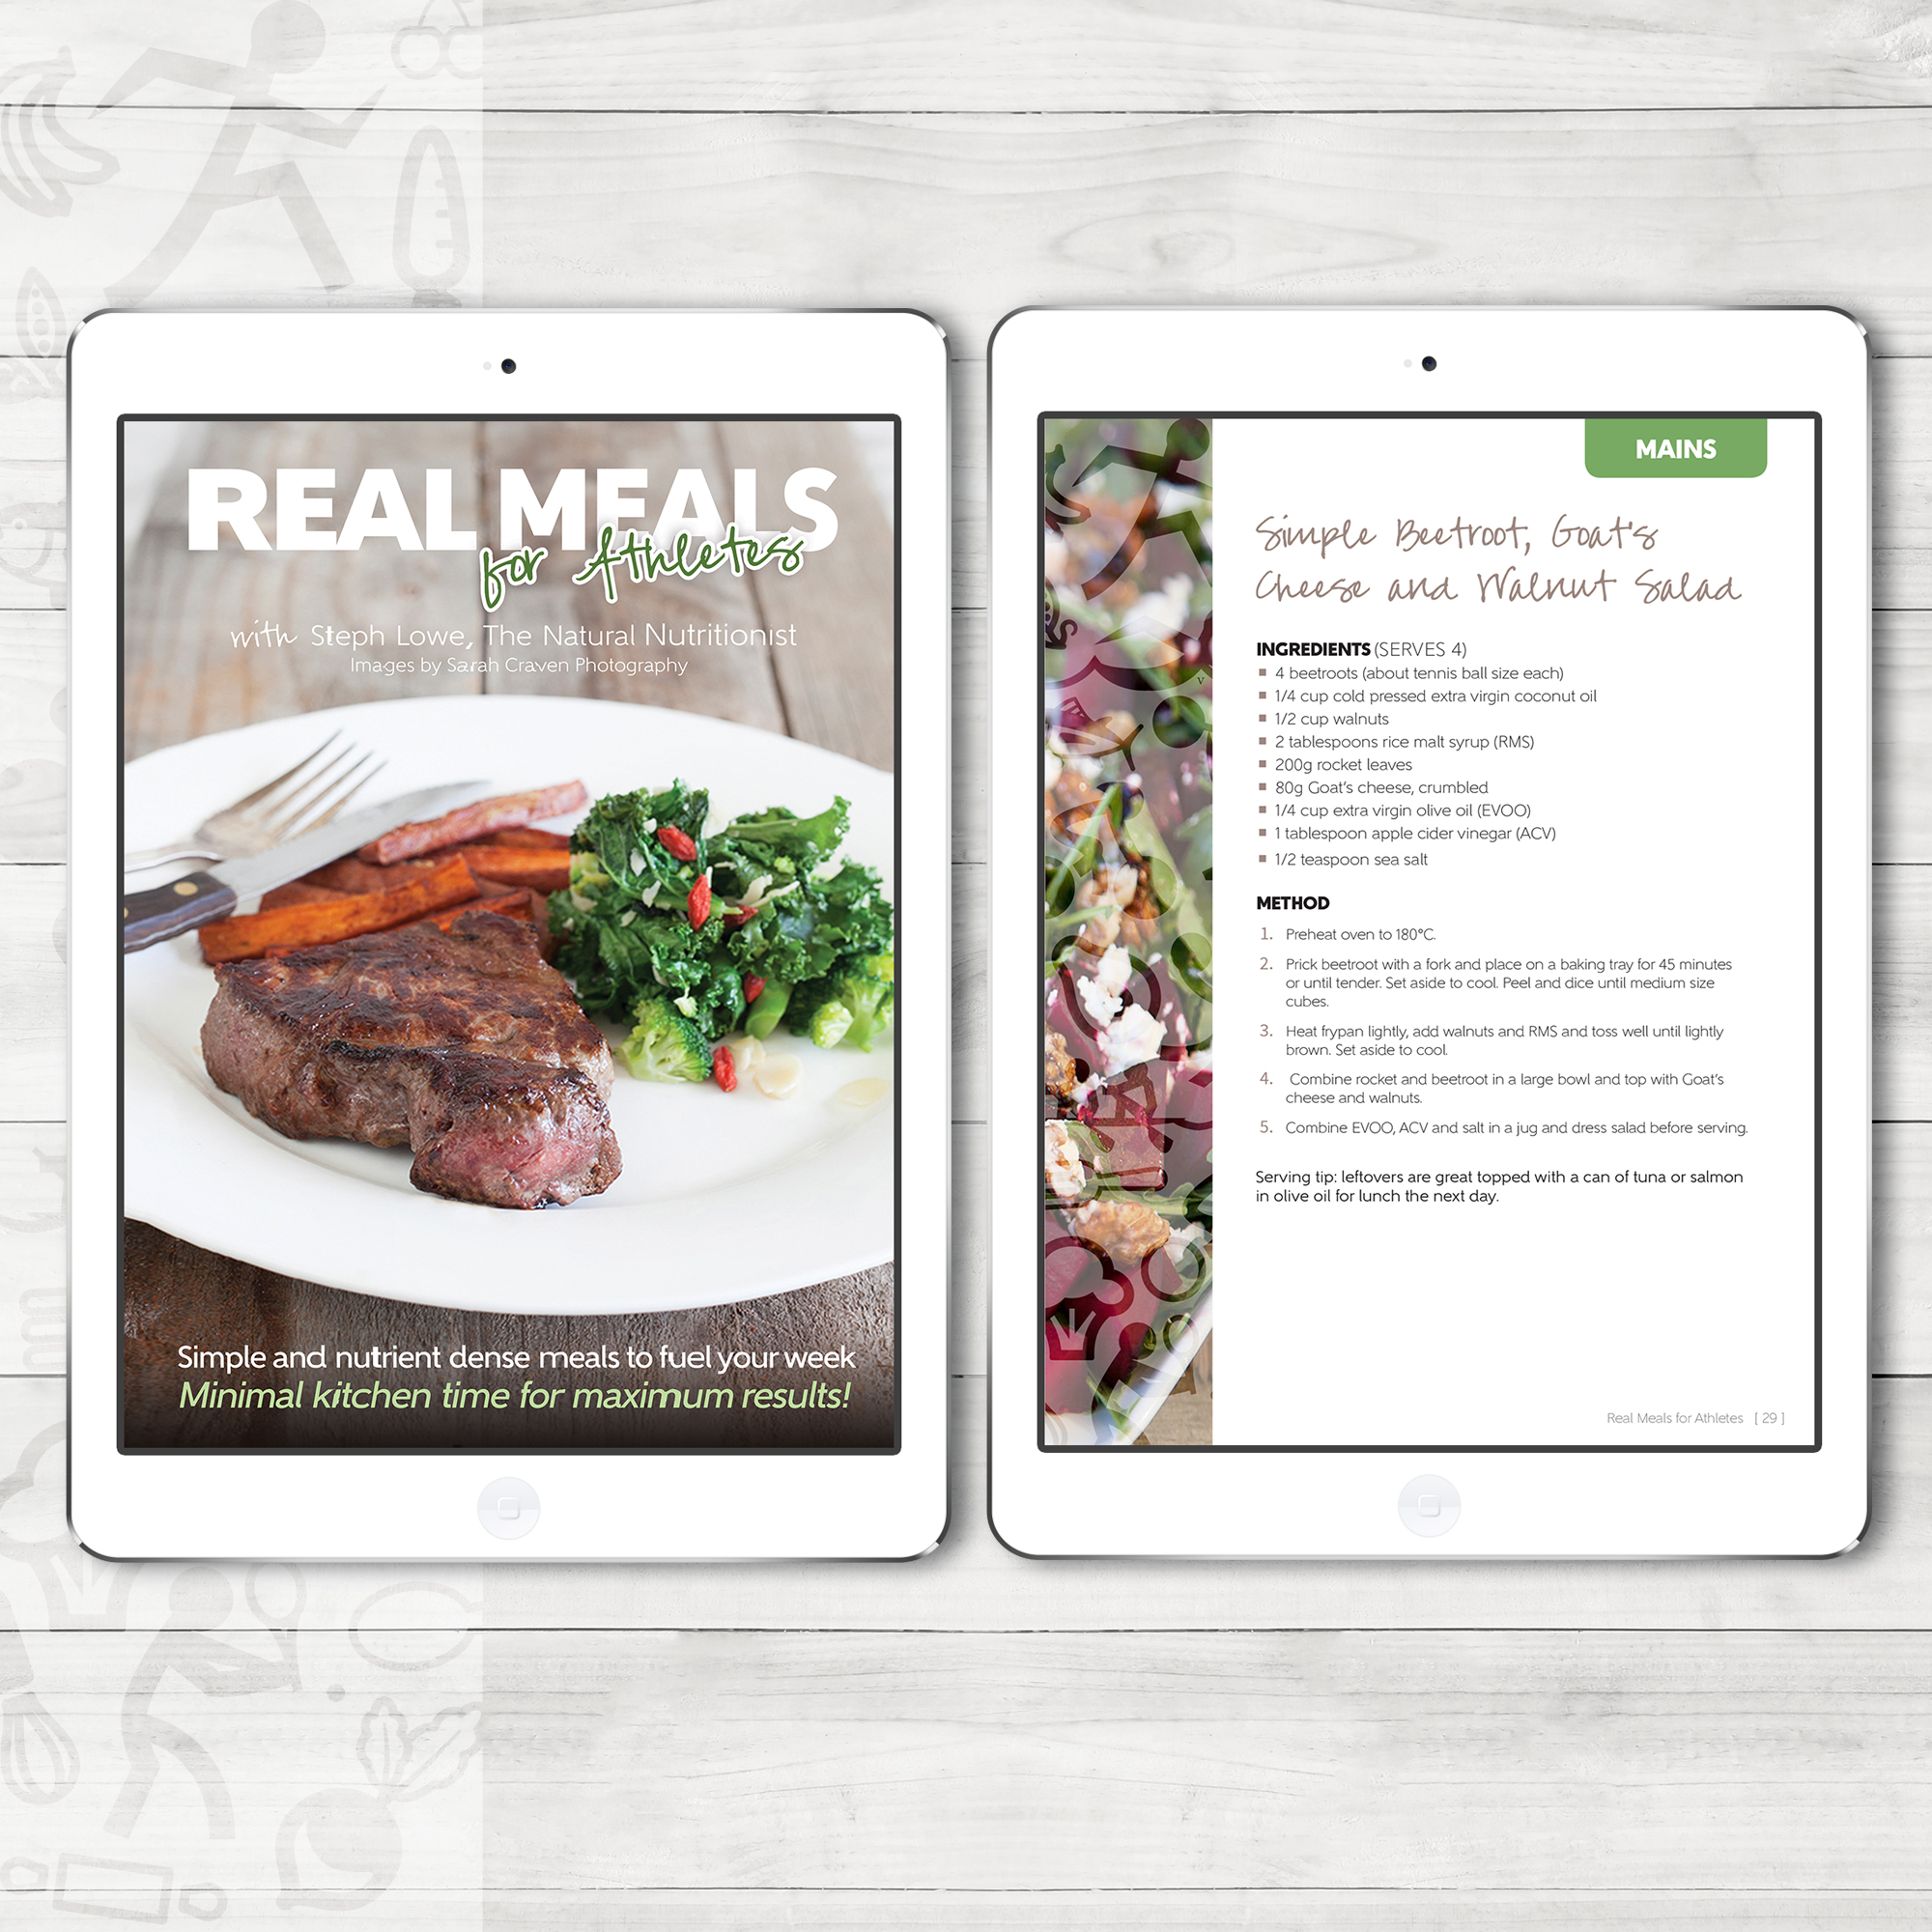  eBook design for The Natural Nutritionist's "Real Meals for Athletes". 